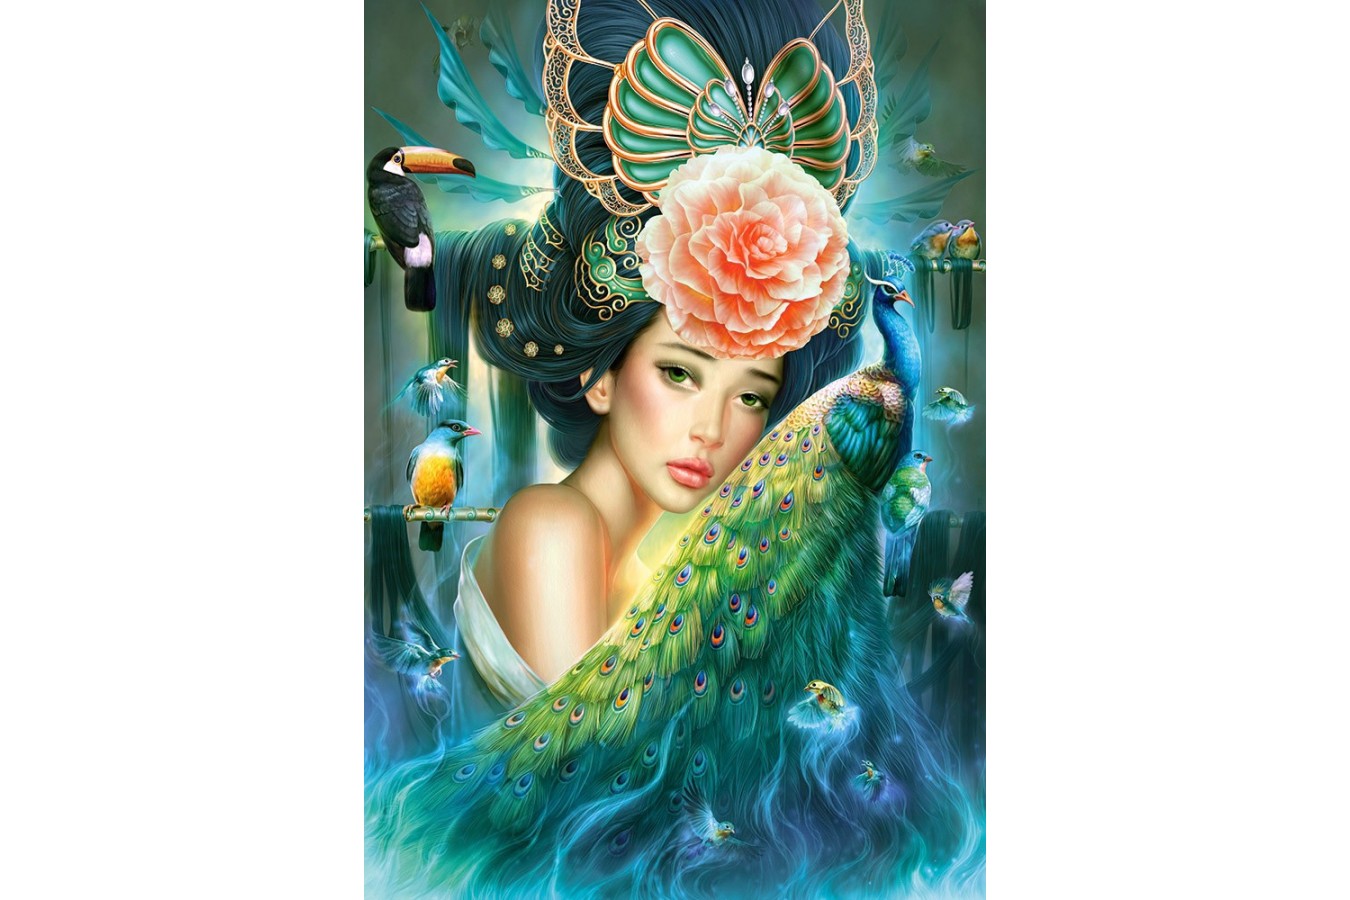 Puzzle Castorland - Lady with a Peacock, 1000 piese